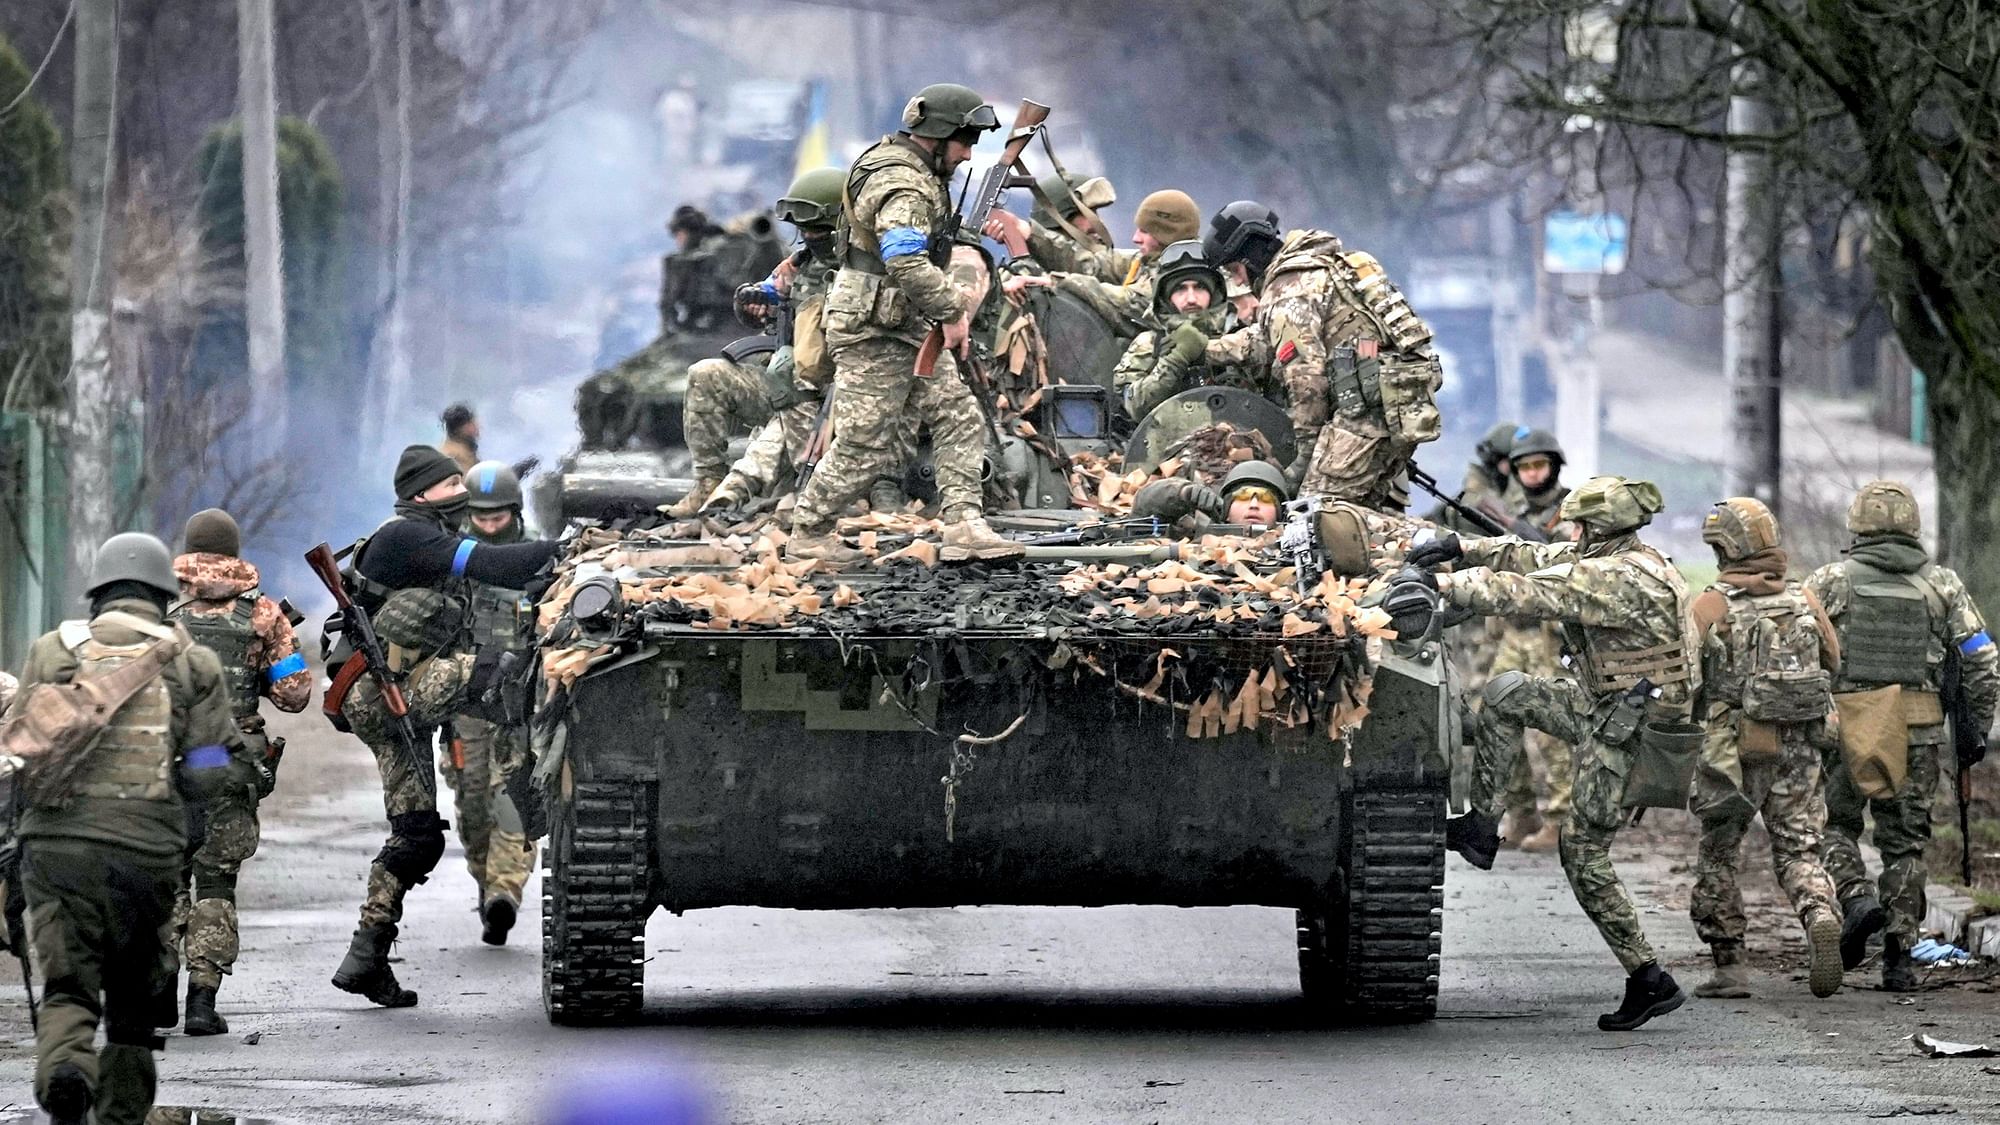 <div class="paragraphs"><p>As many as 3,400 civilians, including 121 children, have died in Ukraine since the Russian invasion, the United Nations said in a report published on Monday, 4 April.</p></div>